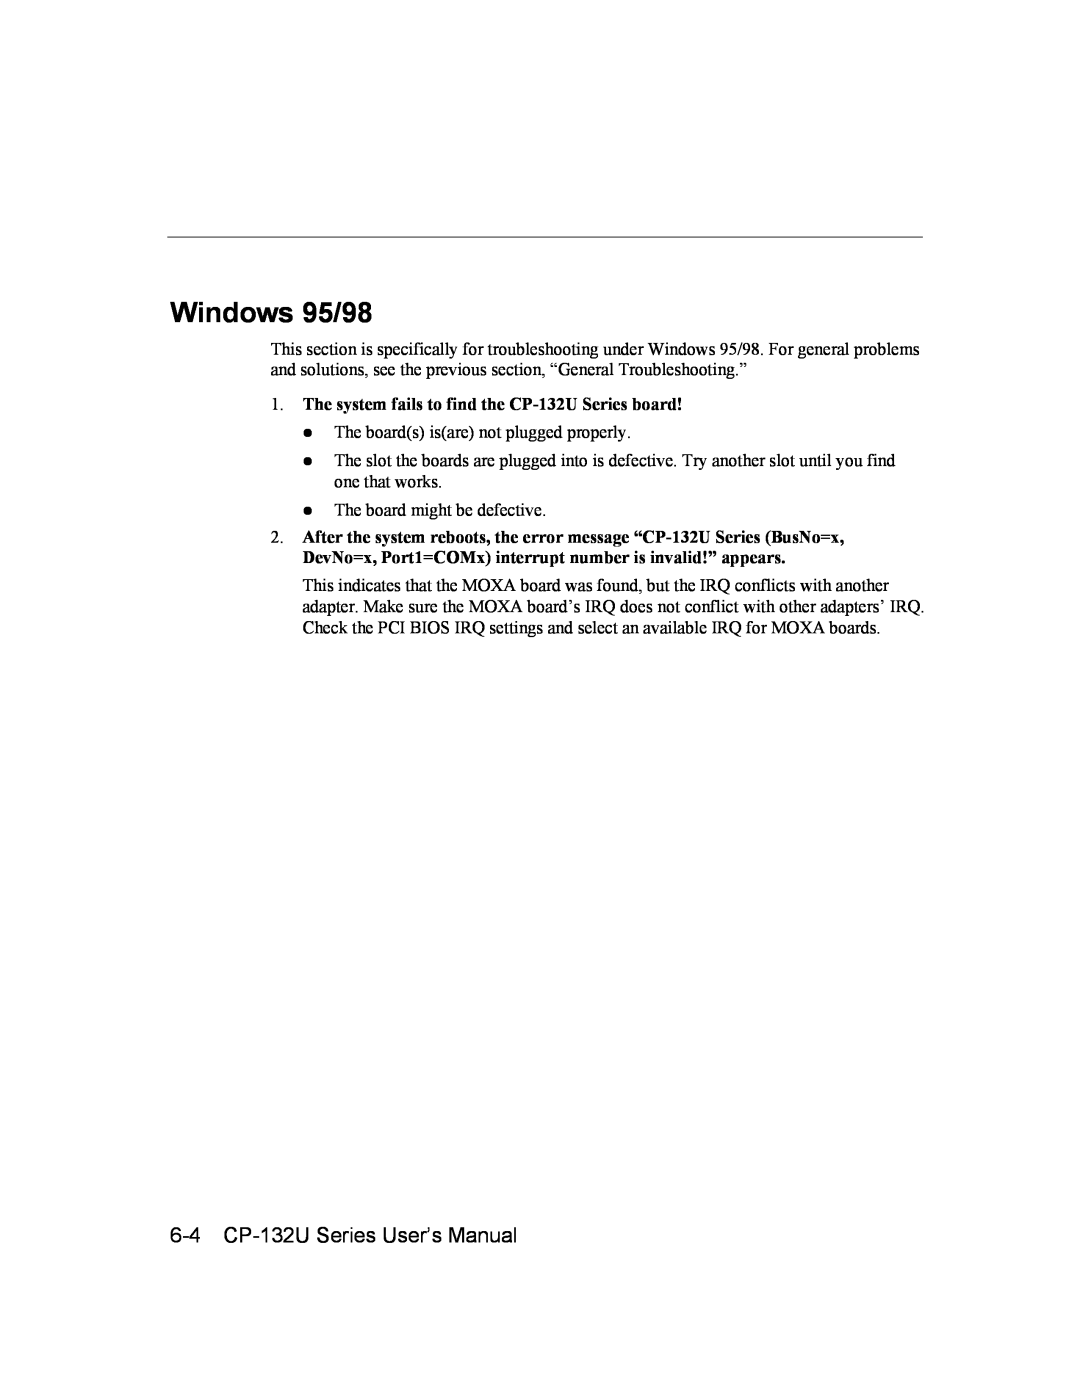 Moxa Technologies 6-4 CP-132U Series User’s Manual, The system fails to find the CP-132U Series board, Windows 95/98 